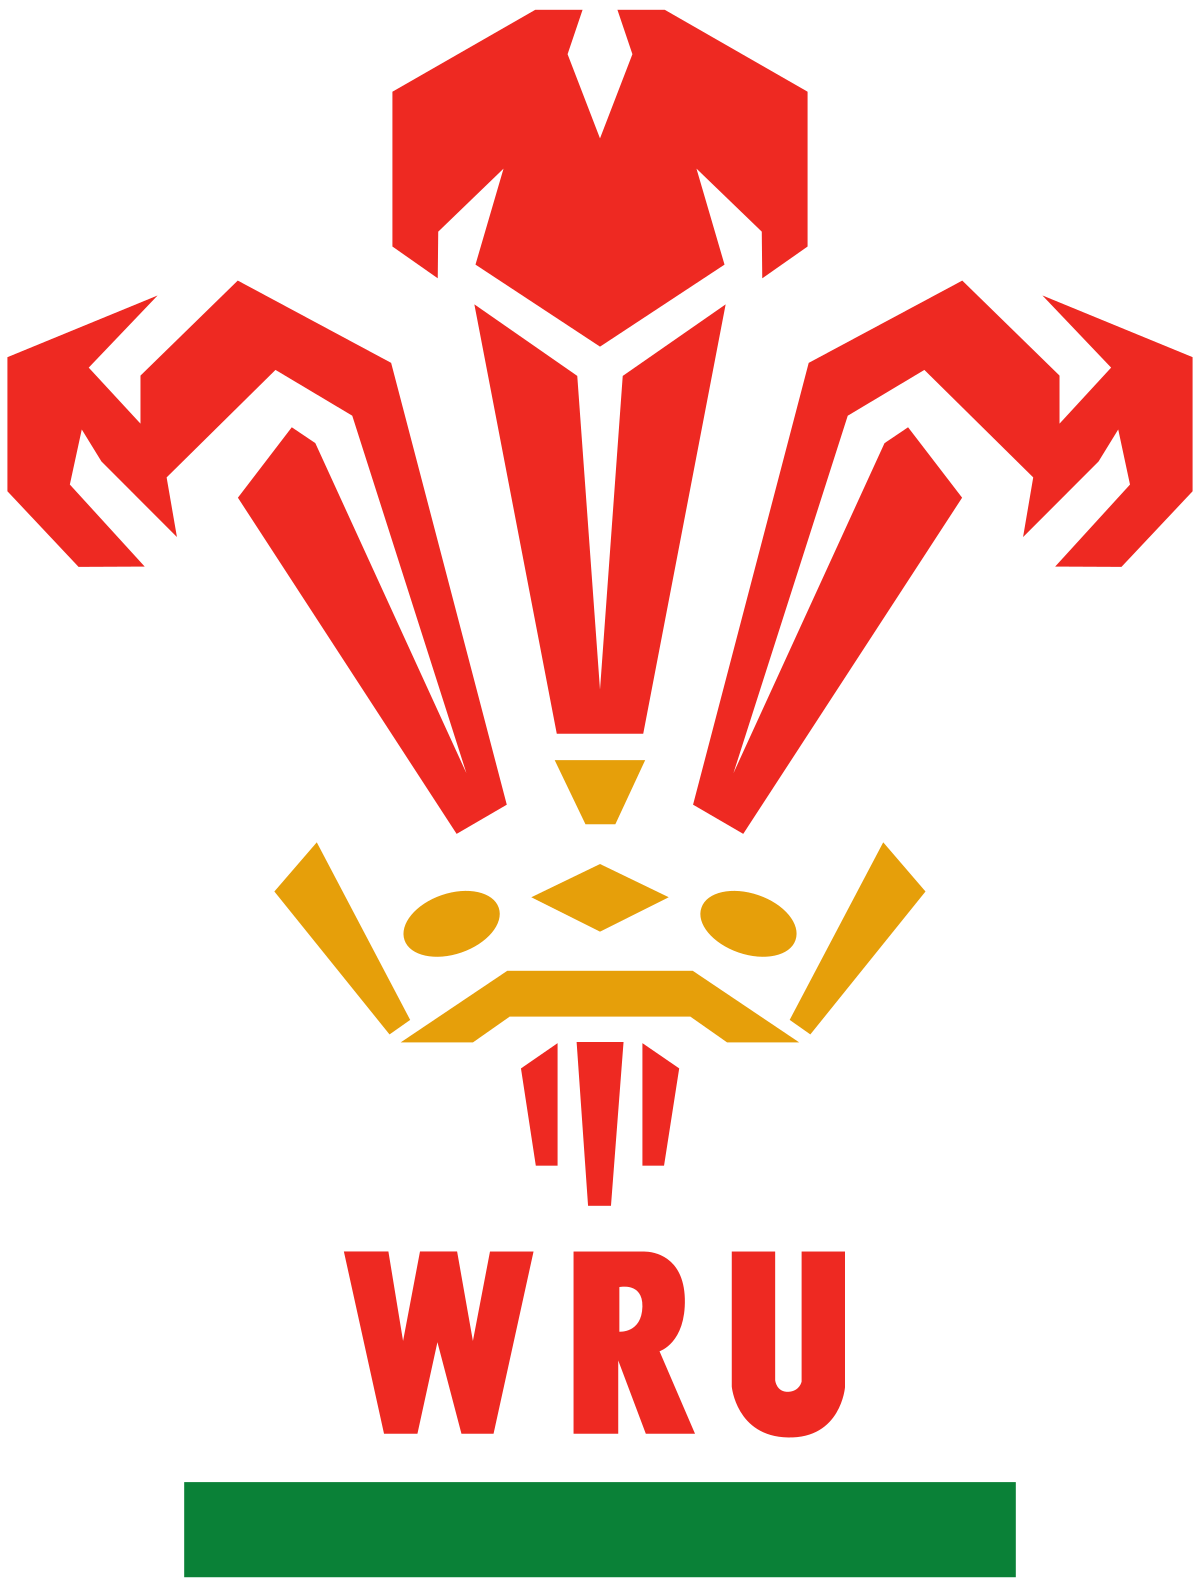 Wales Logo - Welsh Rugby Union Logo transparent PNG - StickPNG